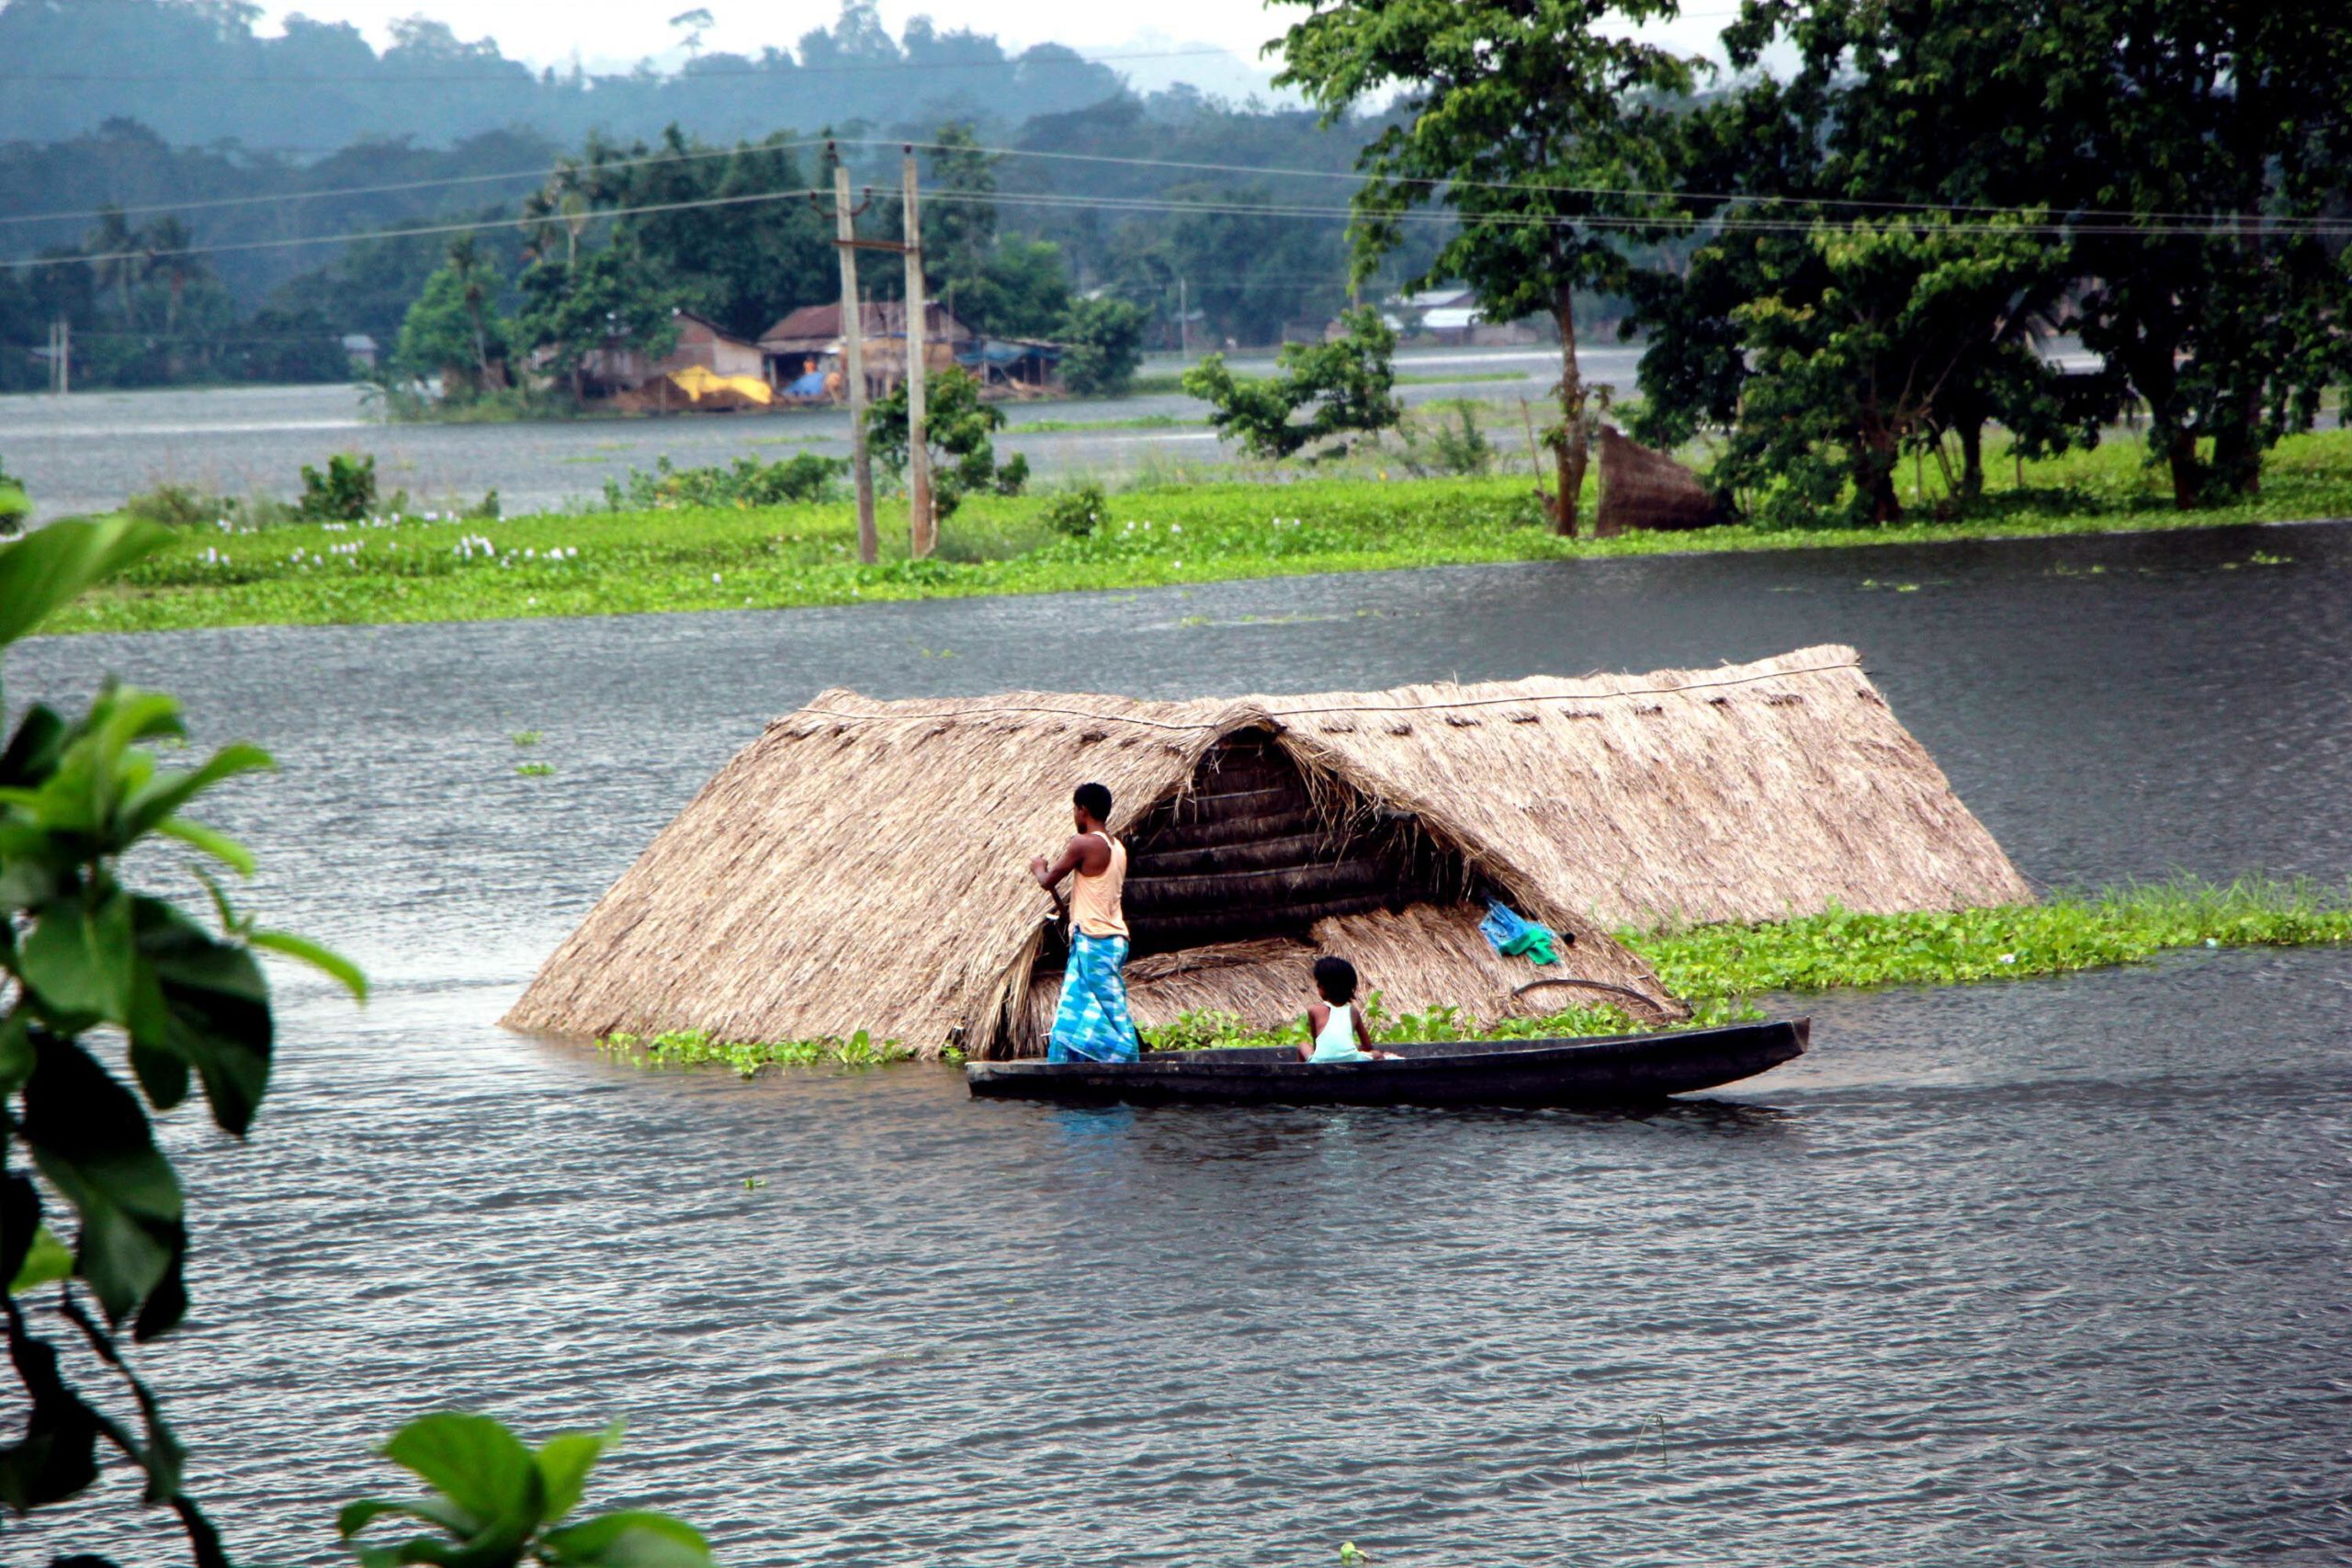 <p>Flood victim moves towards safe land as their house submerged in flood water (Image: Simanta Talukdar / Pacific Press / Alamy Live News)</p>